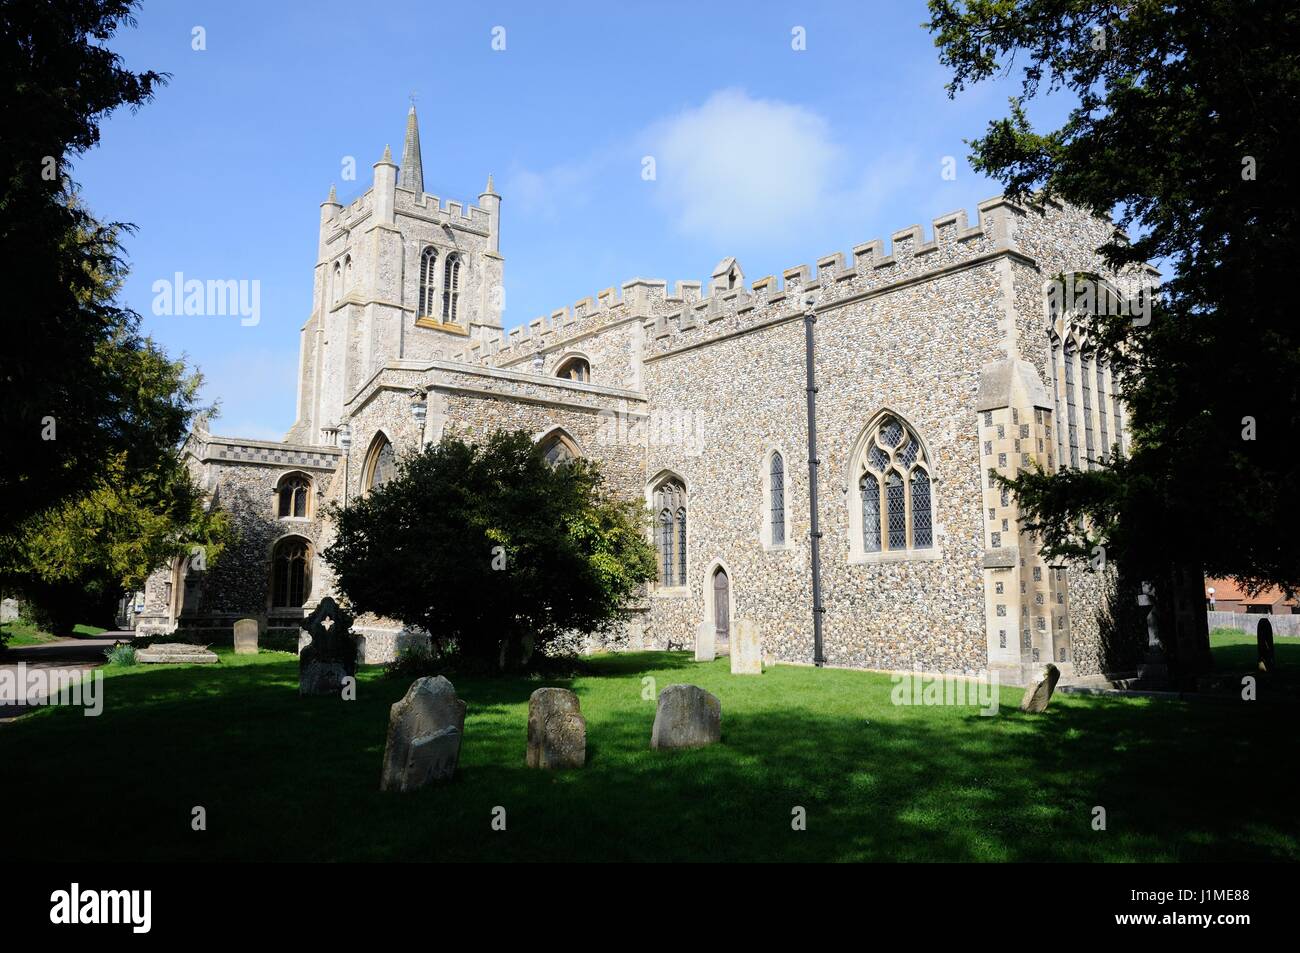 All Saints Church, Melbourn, Cambridgeshire, dates back to the thirteenth century.   It is built of flint and pebble rubble. Stock Photo